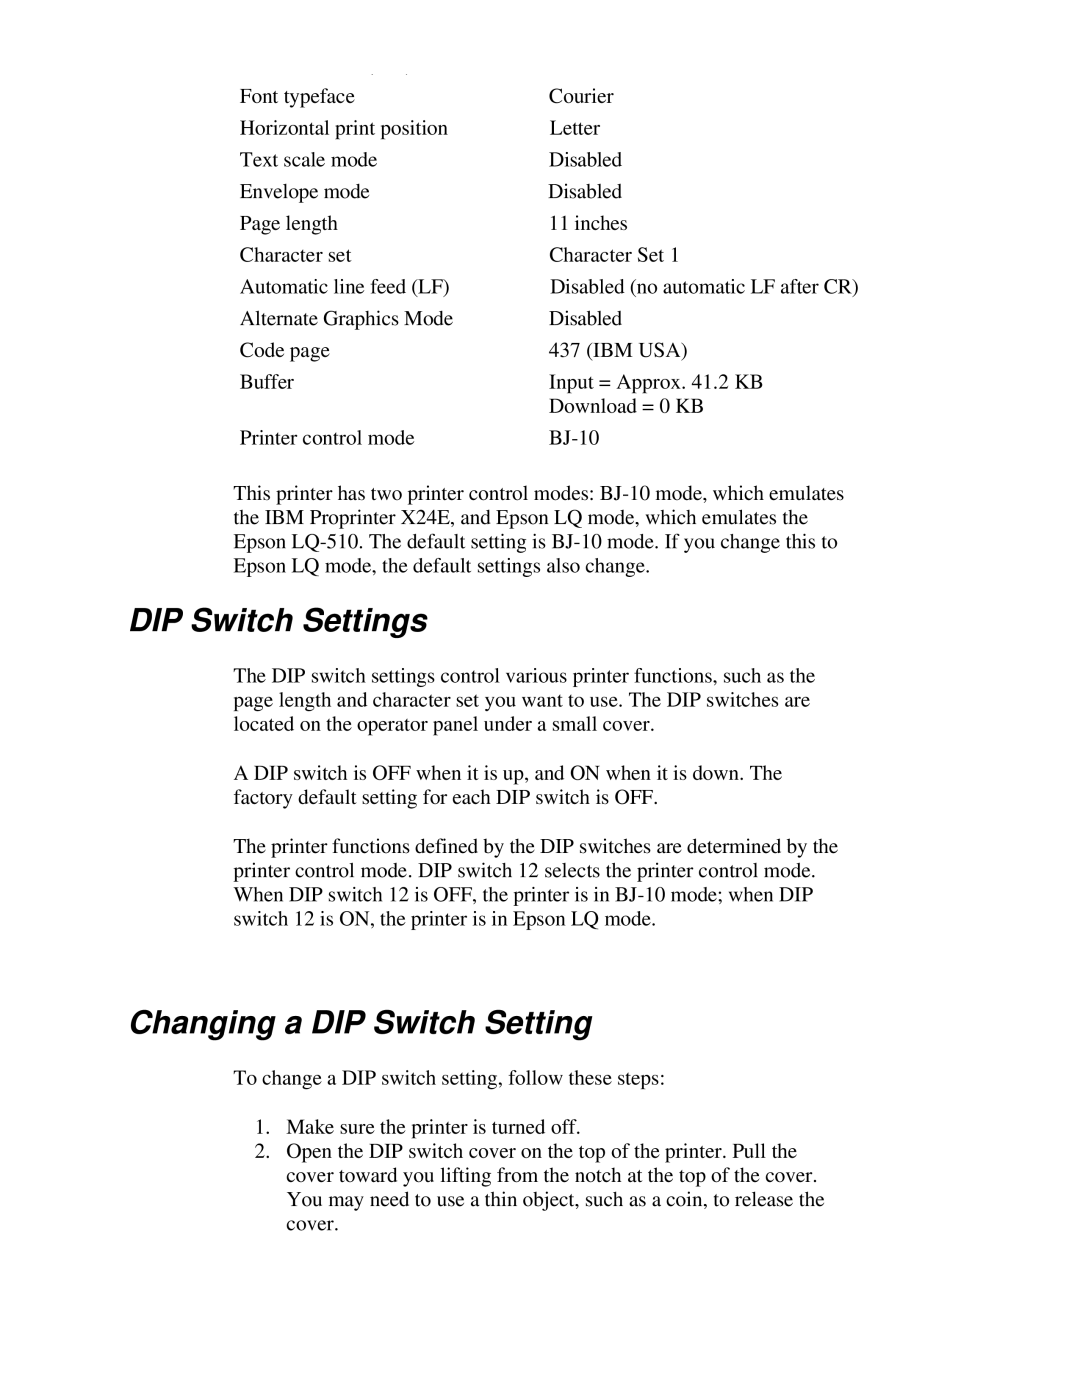 Canon BJ-230 user manual DIP Switch Settings, Changing a DIP Switch Setting 